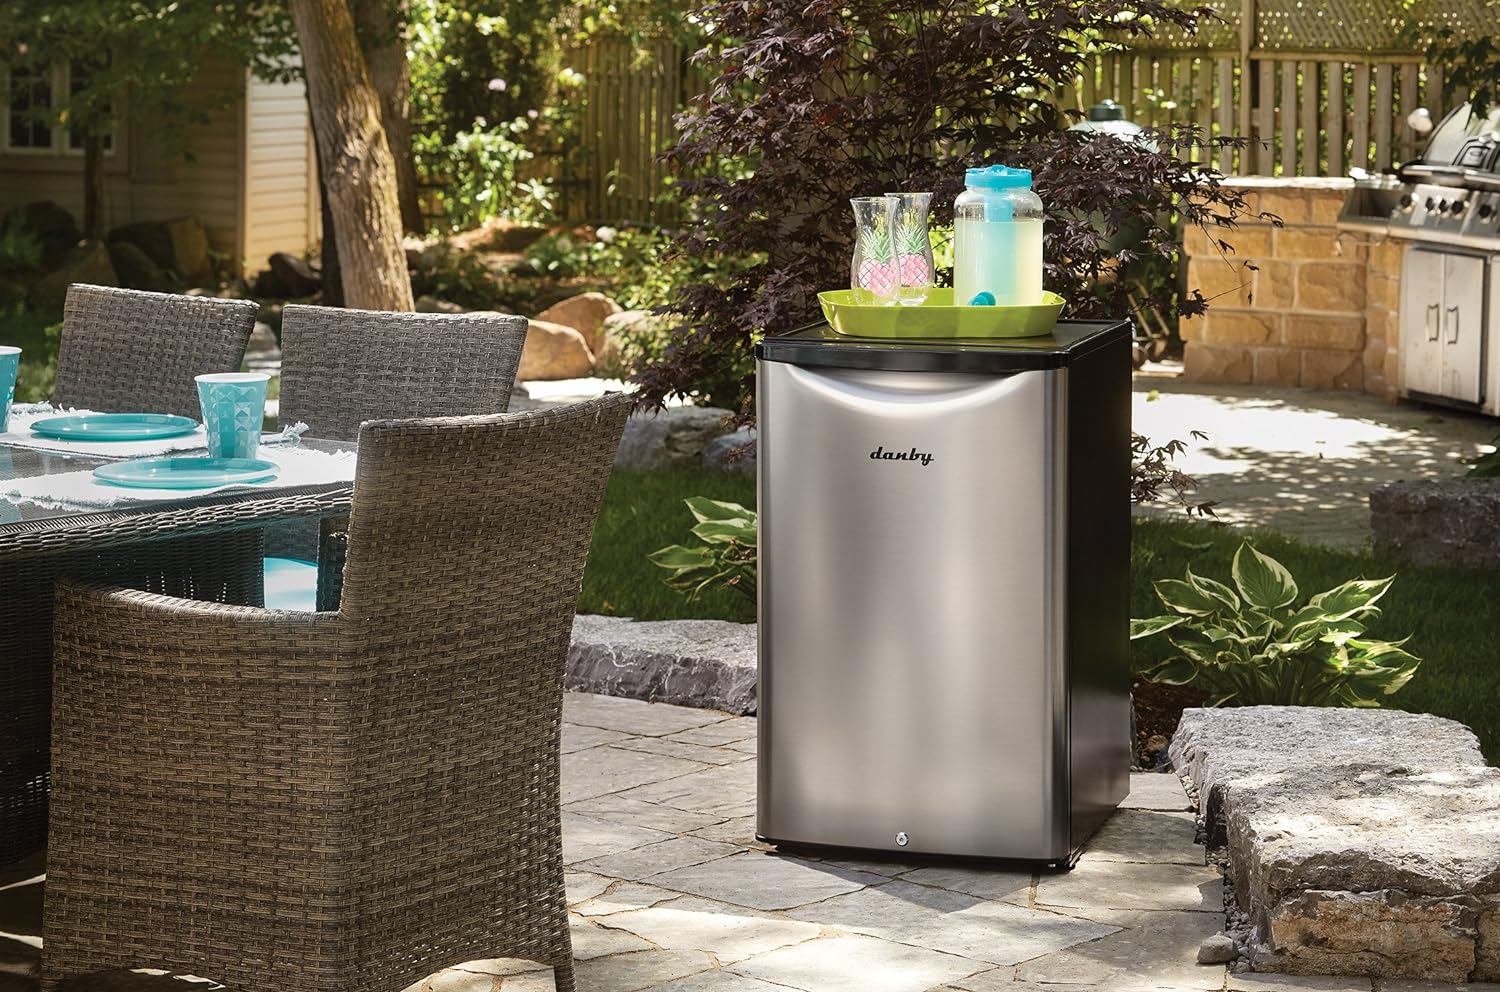 The Danby 4.4 Cu. Ft. Outdoor Fridge on an outdoor patio with a tray of drinks on top.